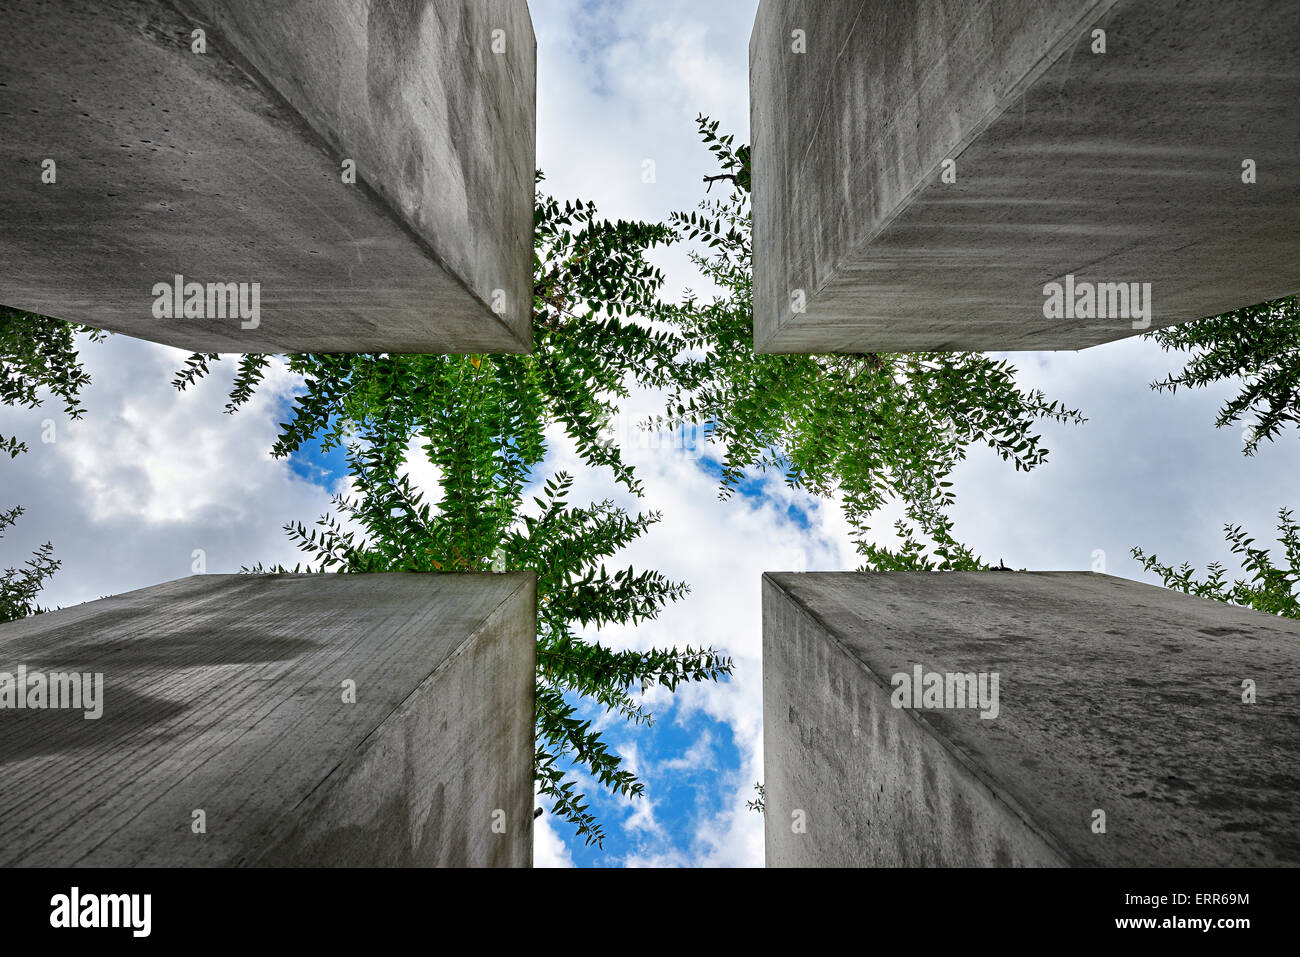 Germany, Berlin, Kreuzberg district, the Jewish museum, the Garden of Exile by Daniel Libeskind. Stock Photo